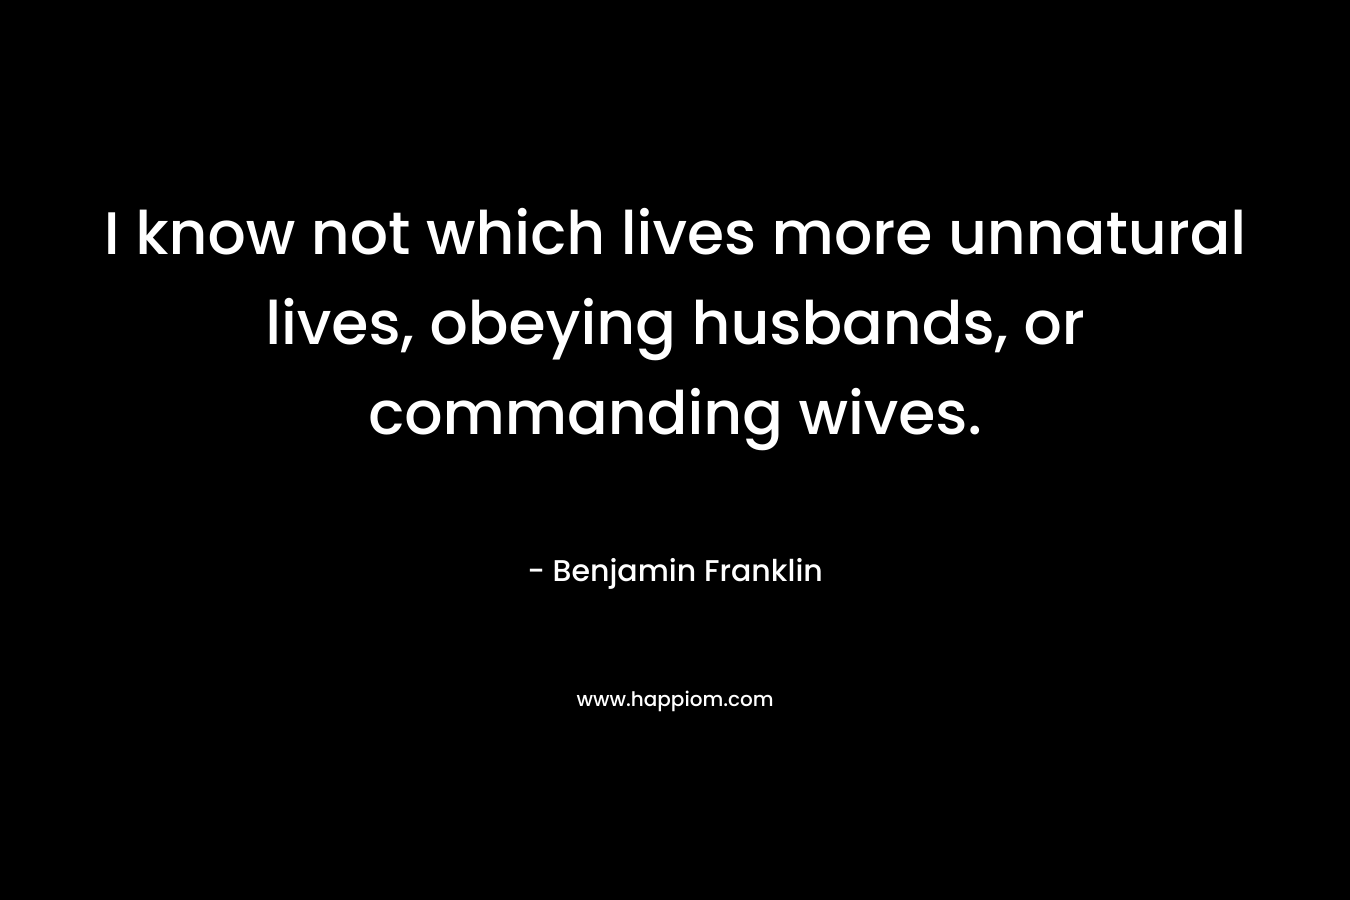 I know not which lives more unnatural lives, obeying husbands, or commanding wives. – Benjamin Franklin